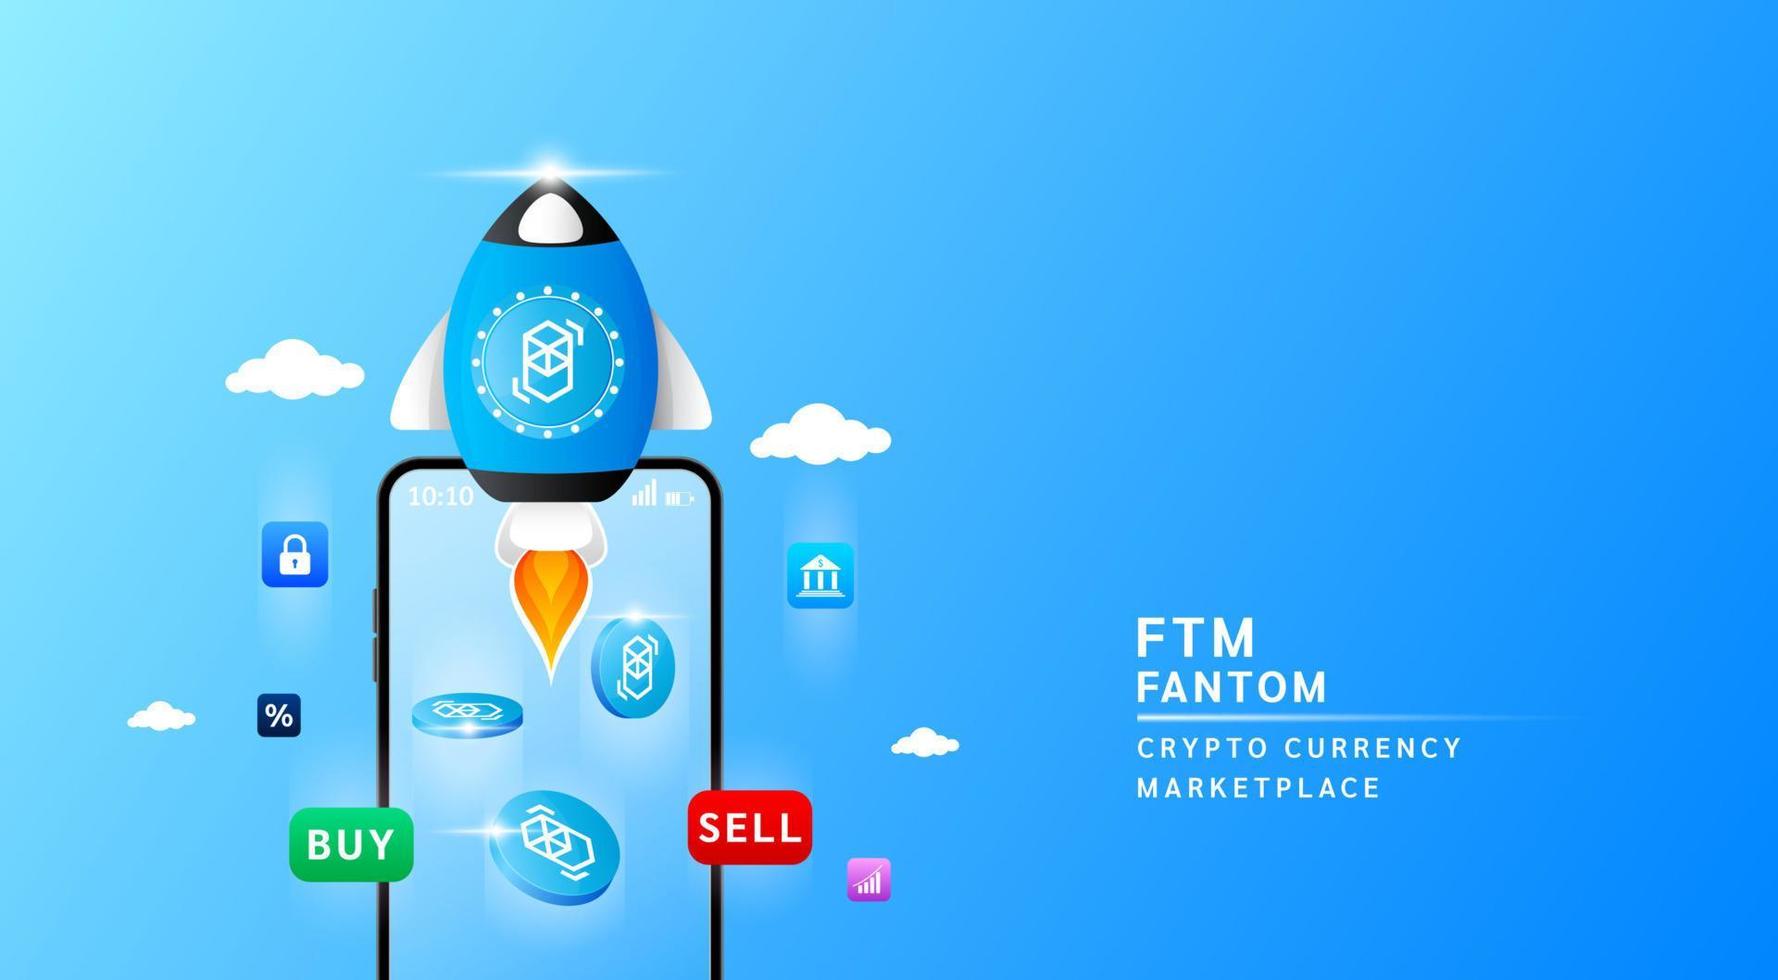 Fantom coin with spaceship flying leave smartphone to the sky. App for trading crypto currency in stock market. Mobile banking cryptocurrency wallet. 3d Vector illustration.